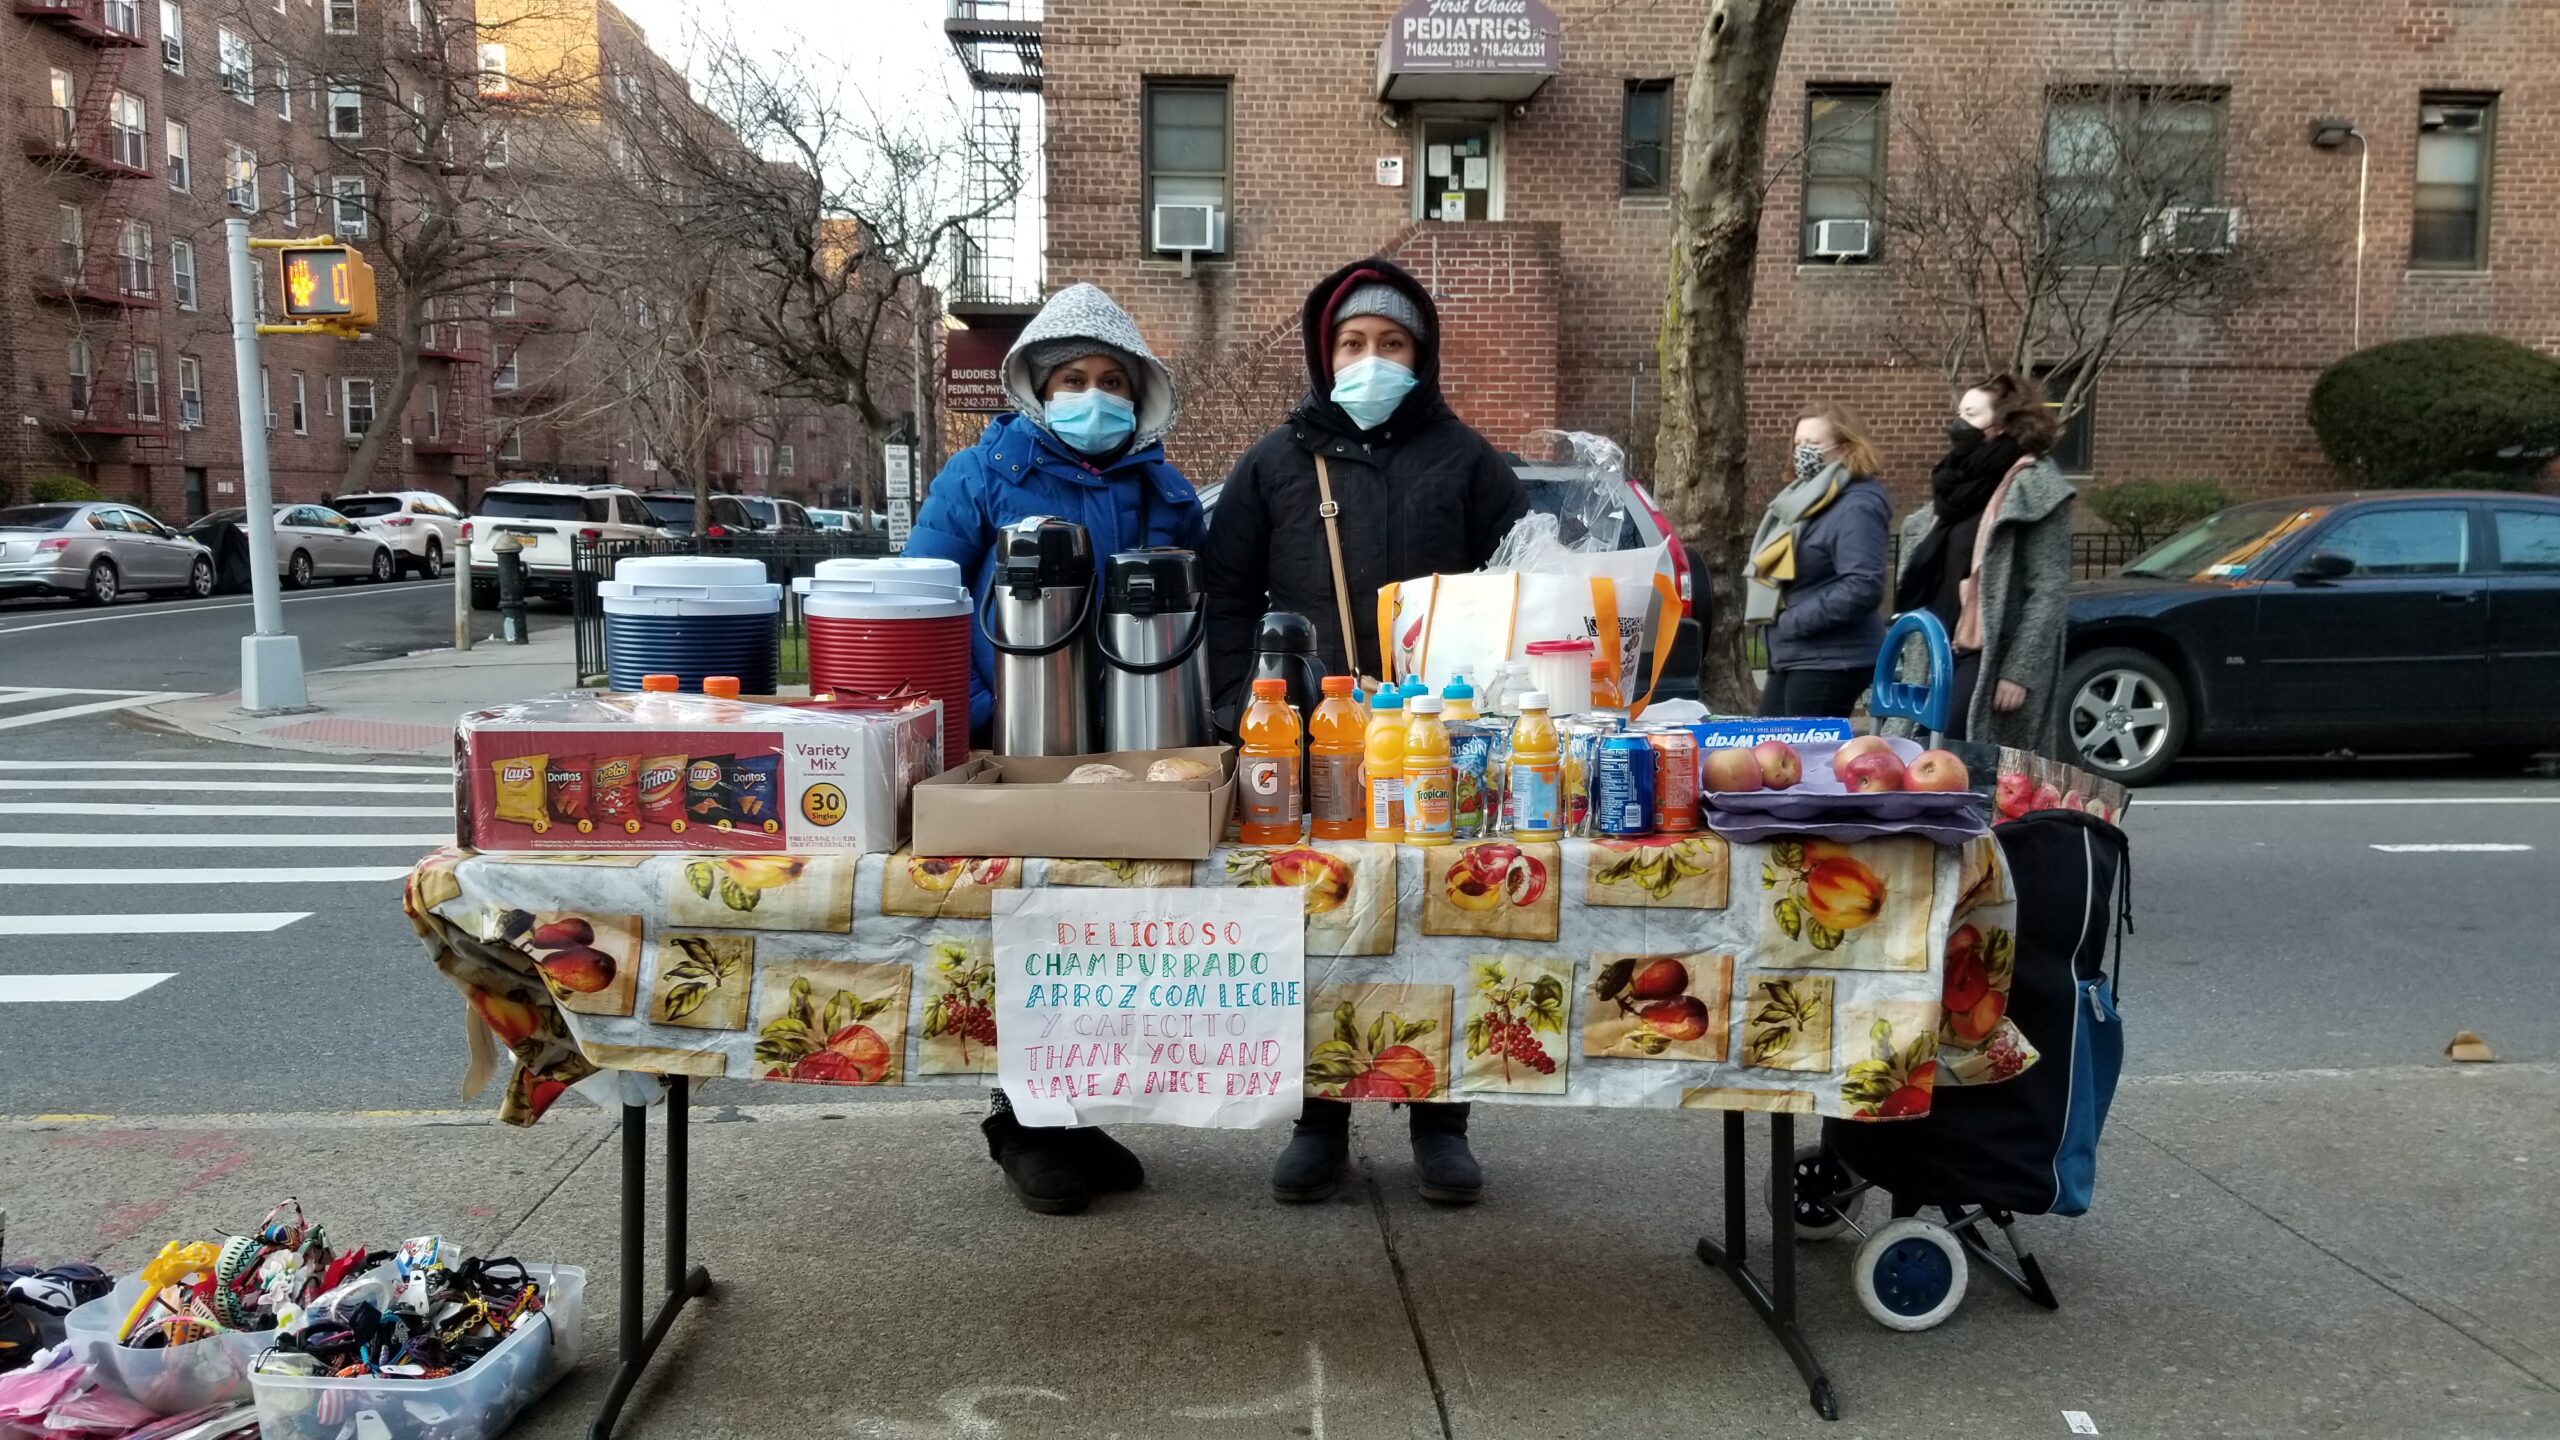 Janet Bravo stands behind her food table with her friend Hilaria. There are thermoses, drink bottles, chips, and fruit for sale. A sign read, "Delicioso Champurrado, Arroz con Leche y Cafecito. Thank you and have a nice day."